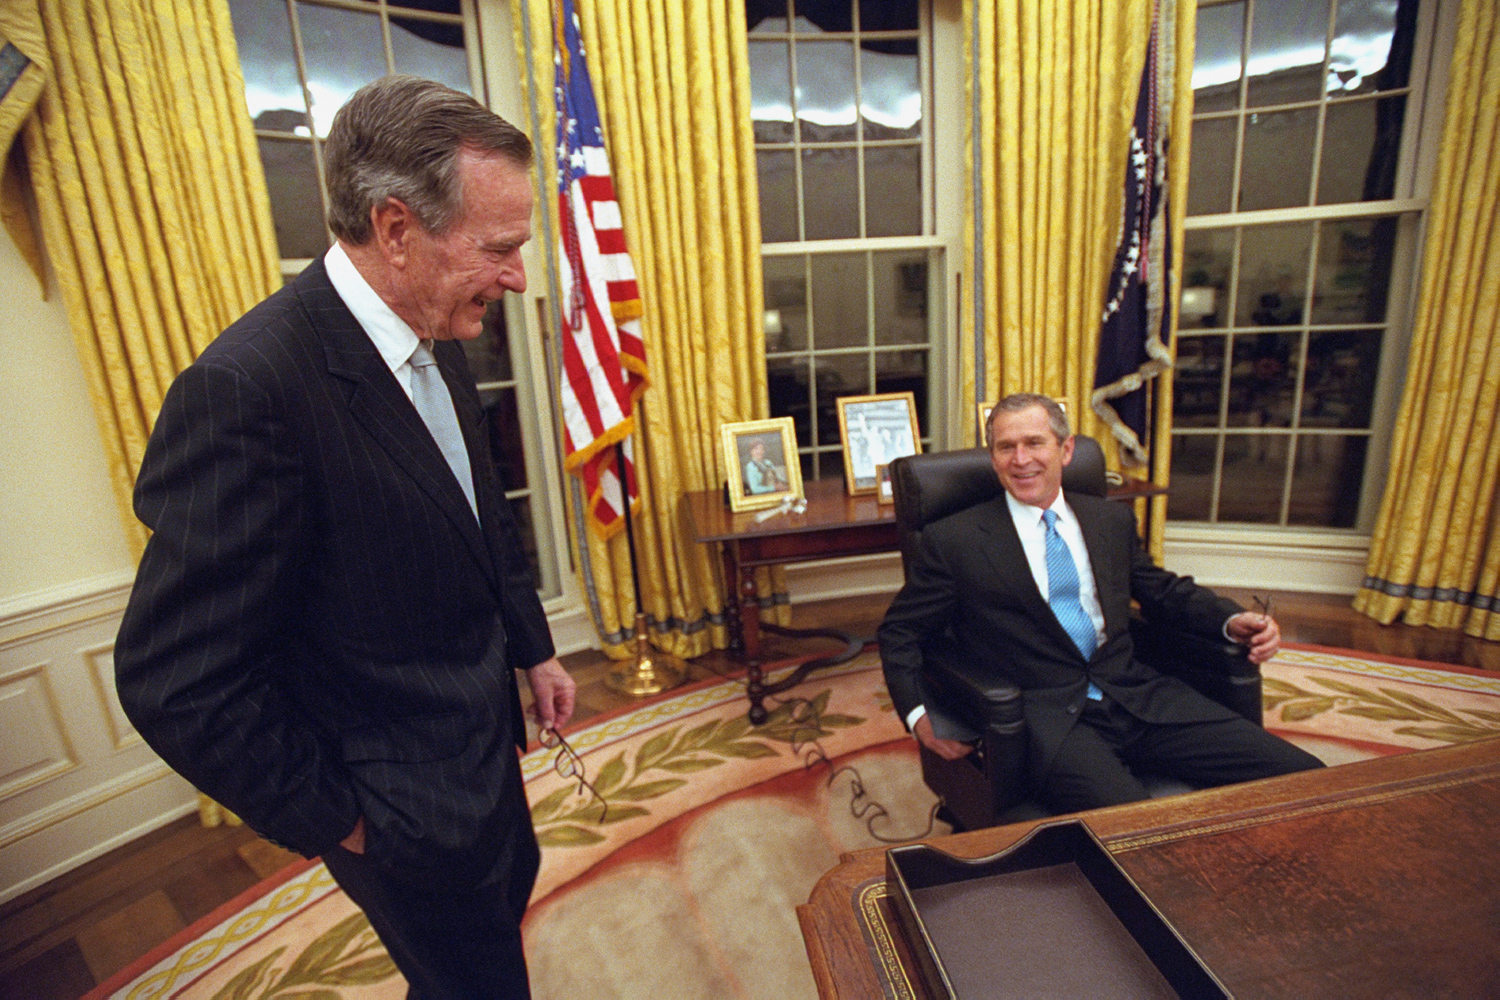 Jan. 20, 2001. George W. Bush, 43rd president of the United States, sits down at the Resolute desk in the Oval Office for the first time as his proud father, George H. W. Bush, the 41st president, looks on.